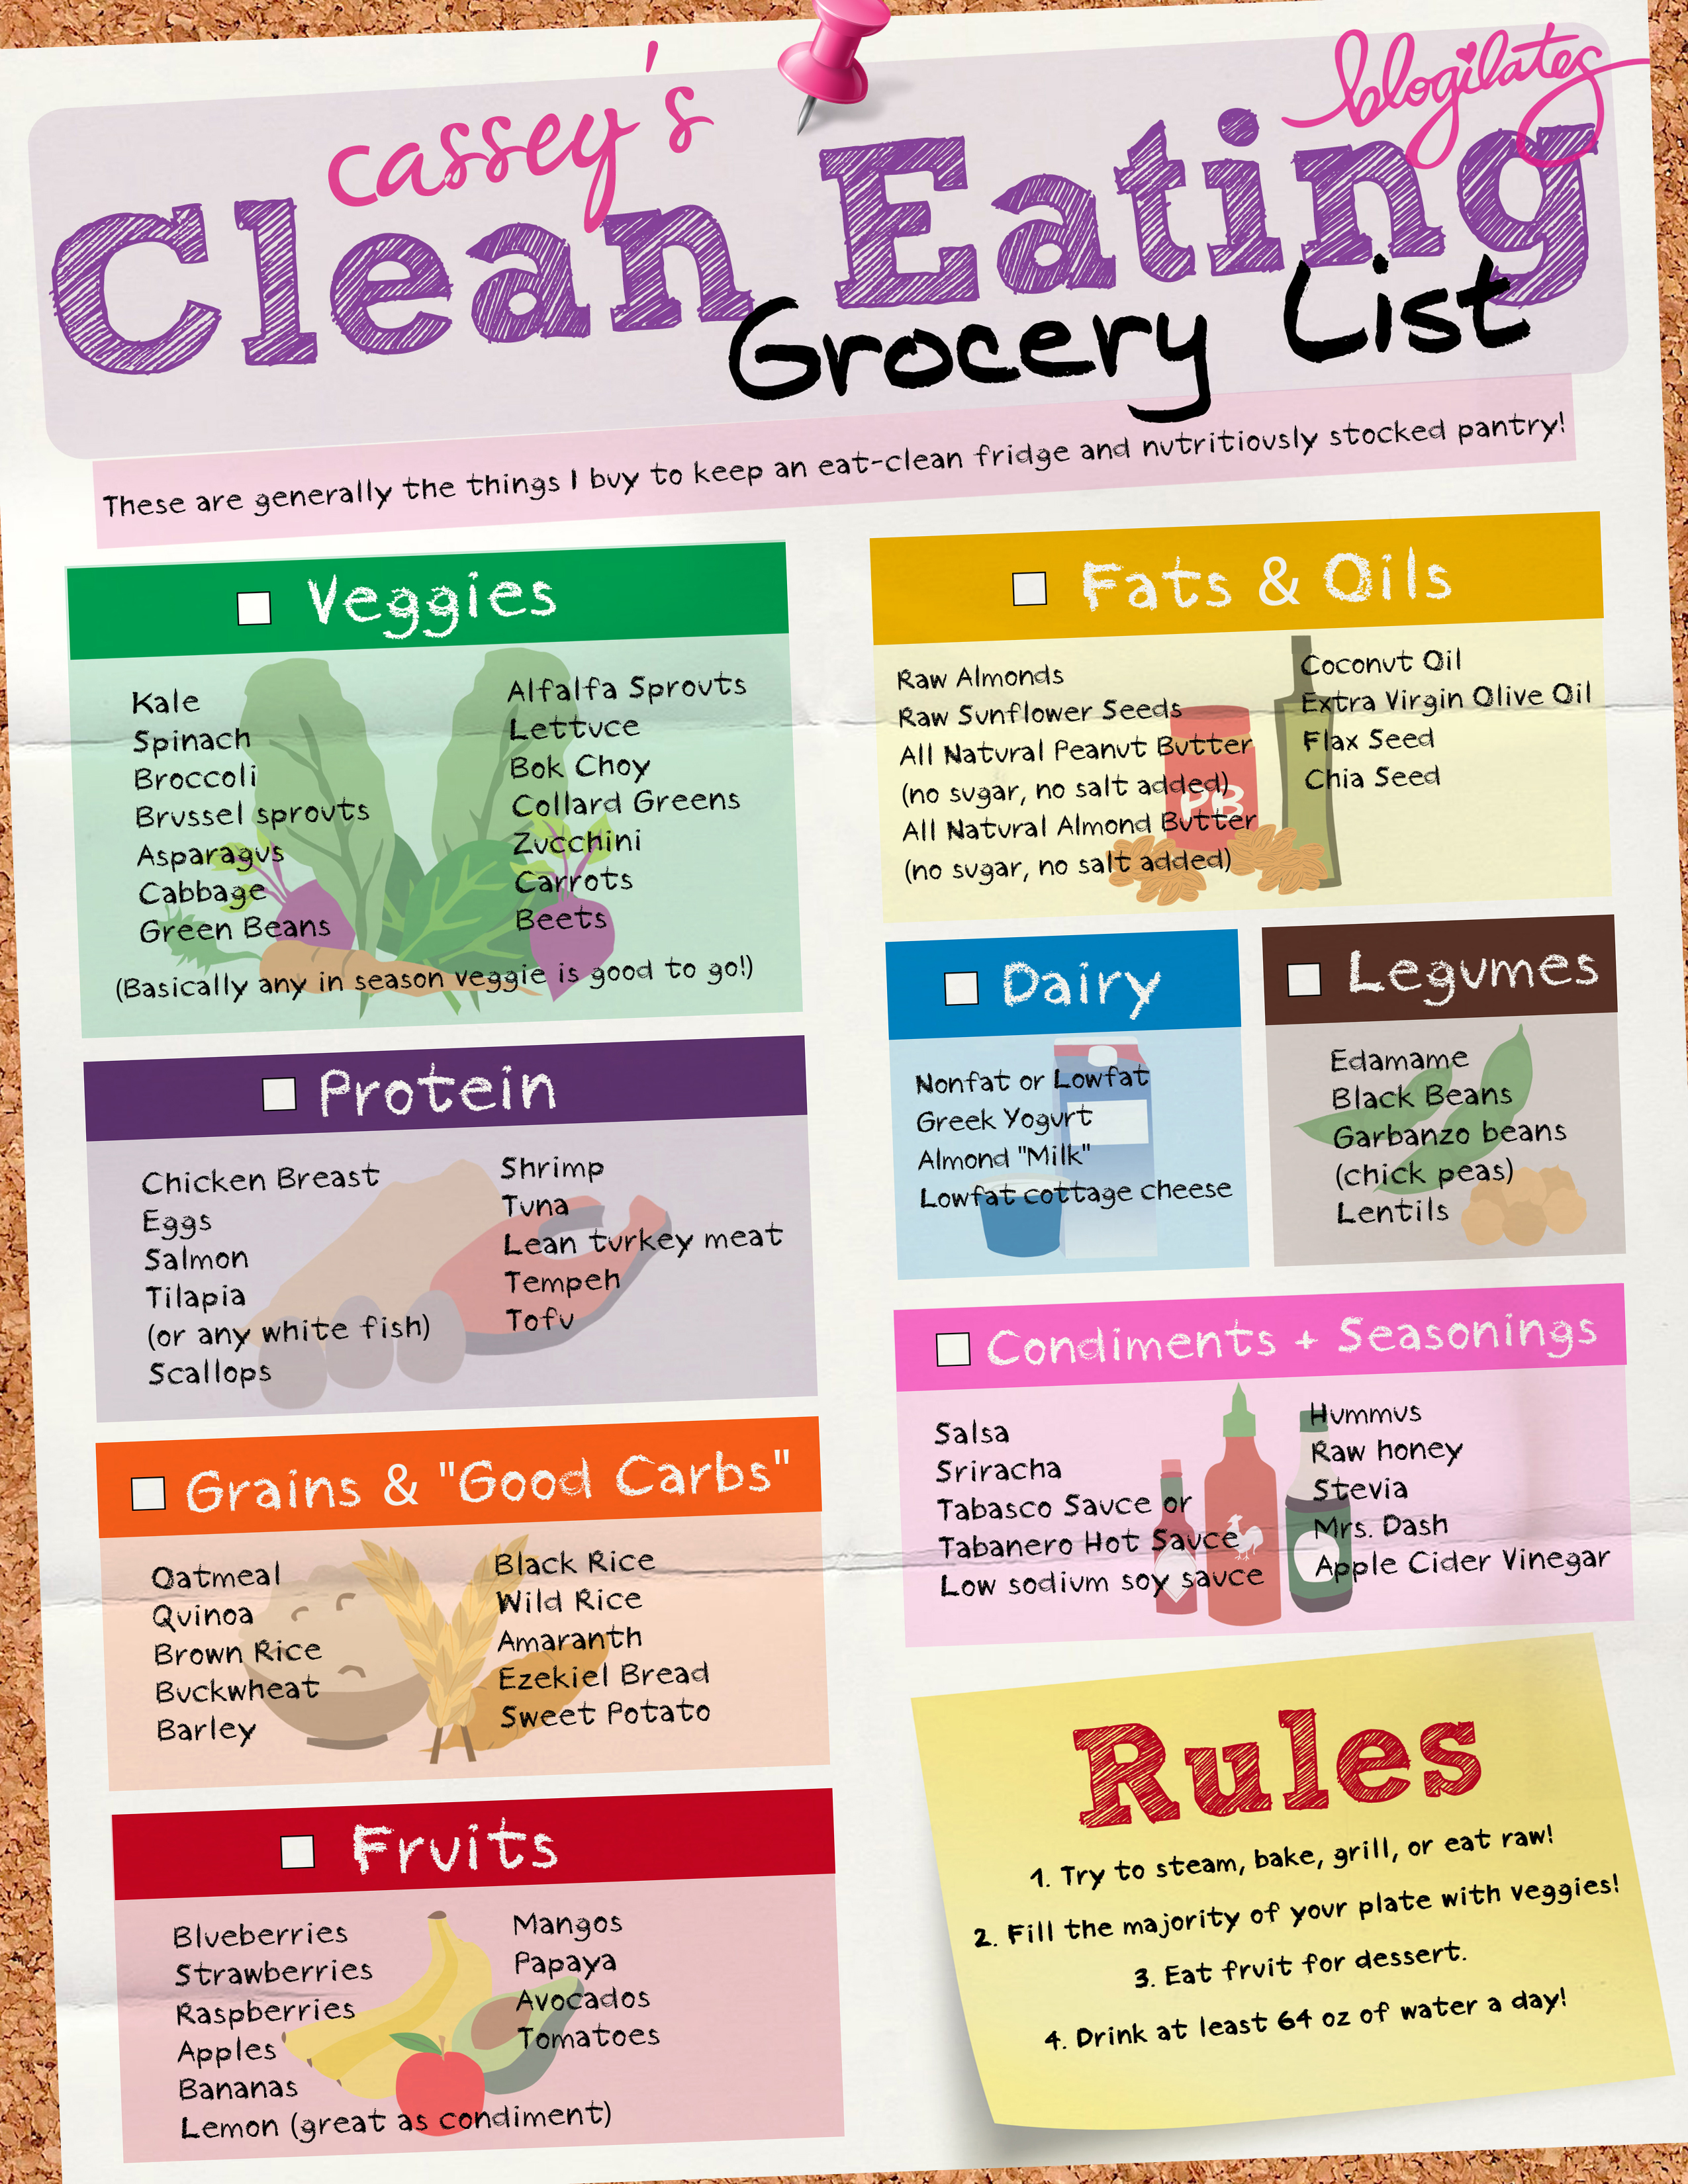 My Ultimate Eat Clean Grocery List! - Blogilates